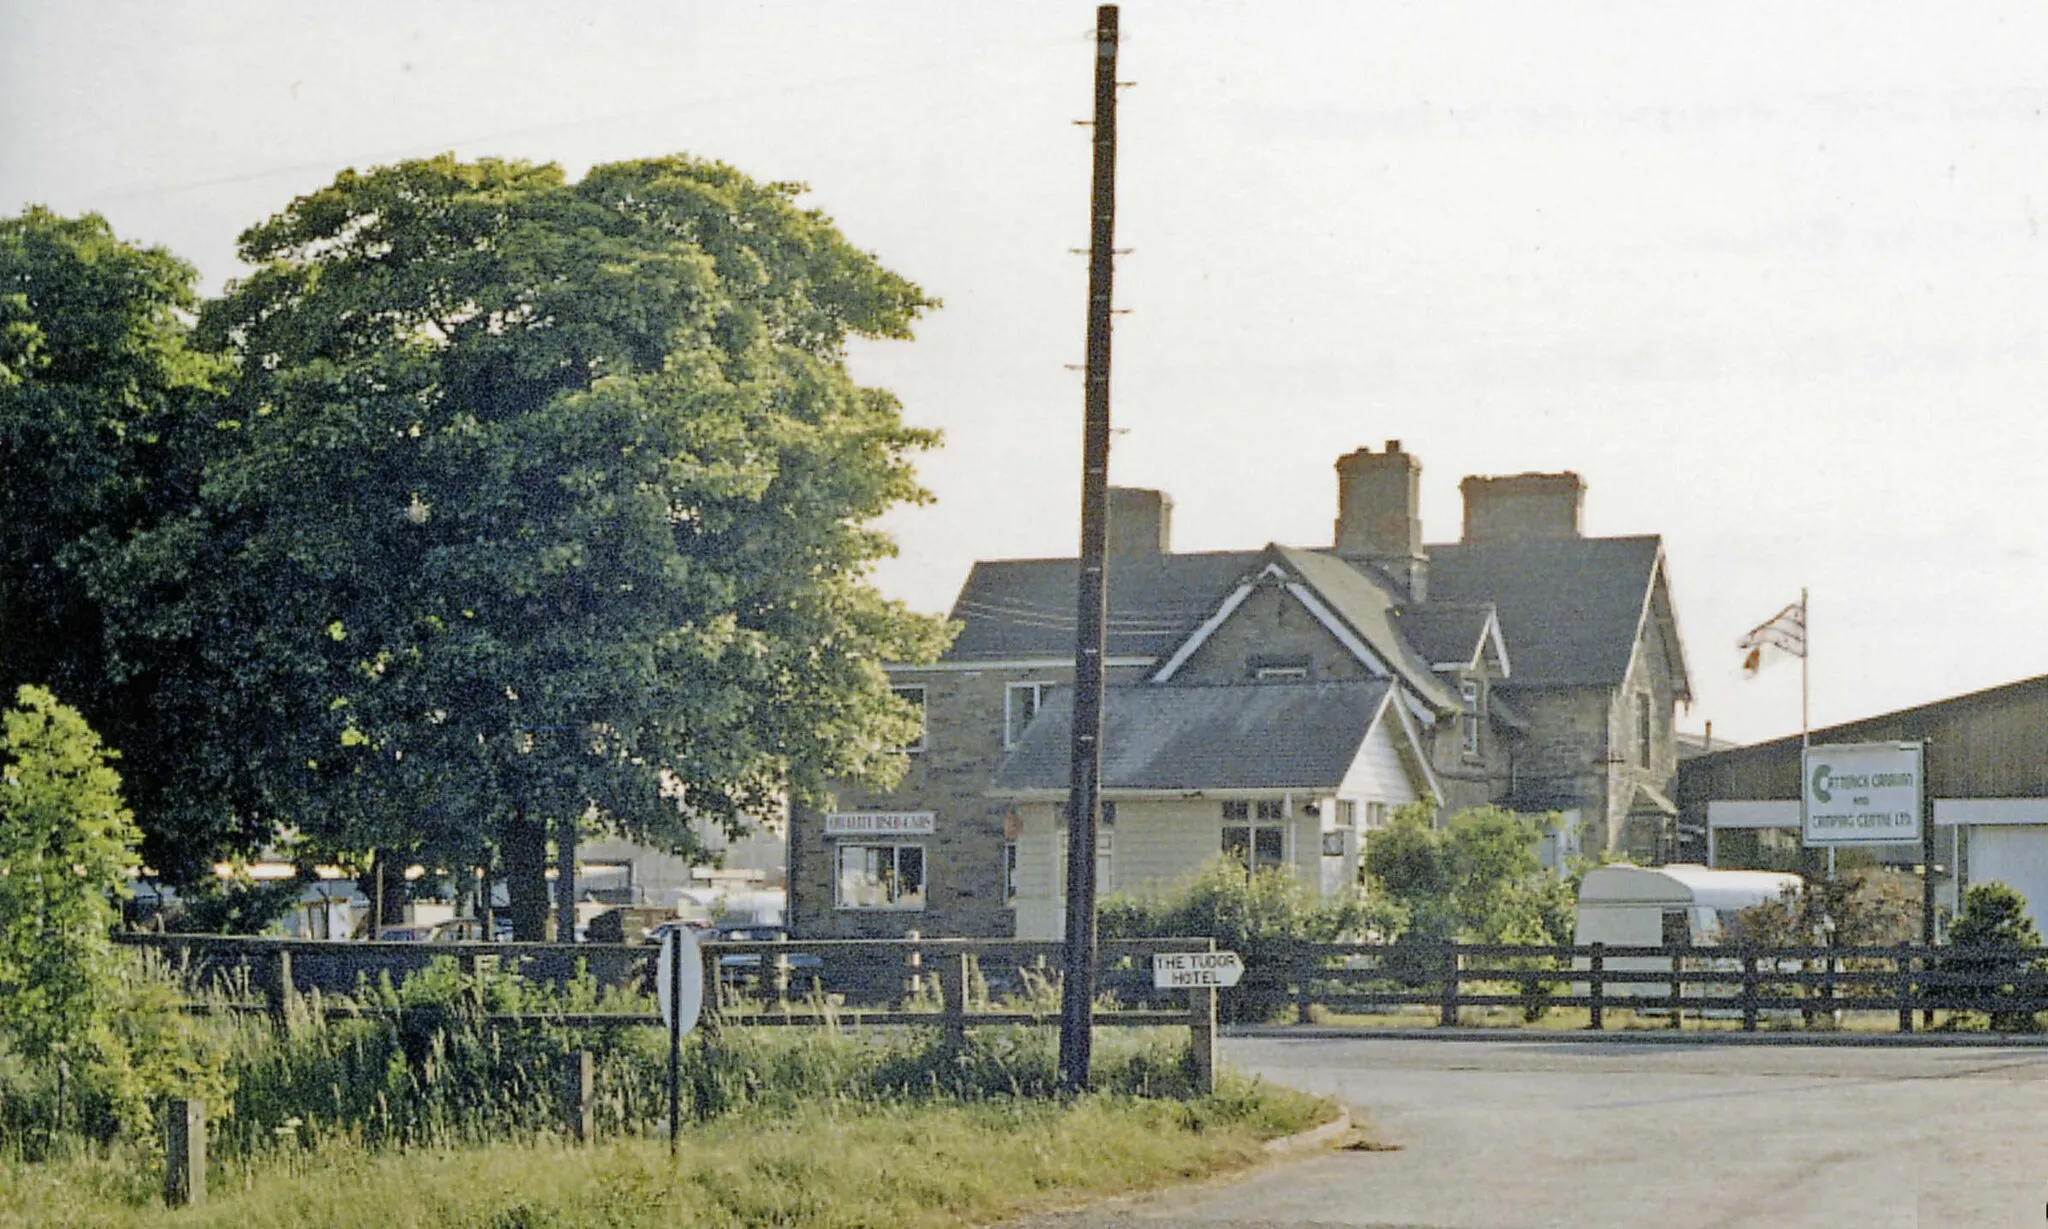 Photo showing: Catterick Bridge station (remains), 1988.
View westward, towards Richmond: ex-NER (Darlington) - Eryholme Junction - Richmond line. The station, also the Catterick Military Railway which branched off to the SW, served the vast Military Camp - the largest of the British Army, with 12,000 men - and therefore important, even after World War Two, the branch seeing regular Troop and Leave trains. However, it and the line to Richmond were closed to passengers from 3/3/69 and to goods from 9/2/70. The track, now a roadway, was lifted in October 1970. (The Goods Yard was the scene of a major explosion of ammunition in February 1944).